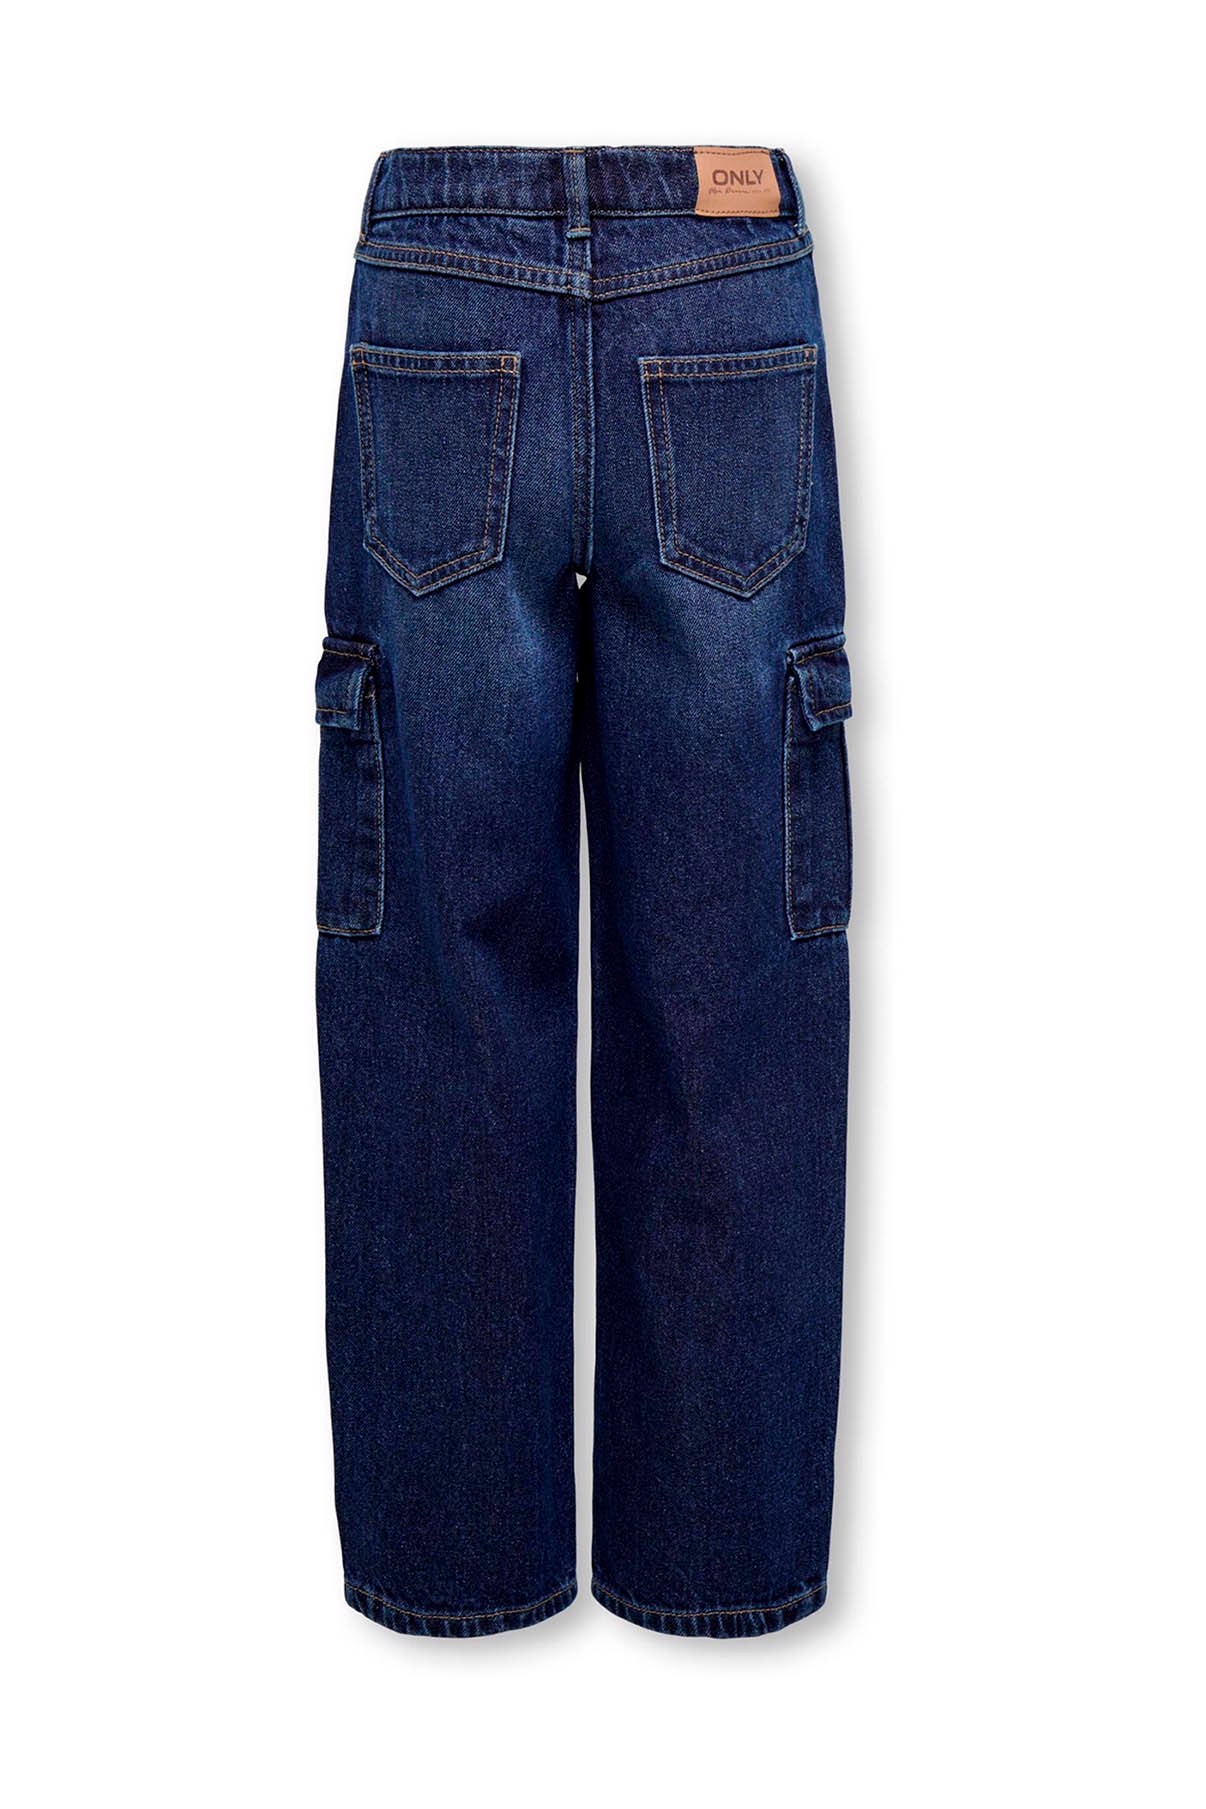 Only Kids Jeans KOGHARMONY WIDE CARGO CARROT